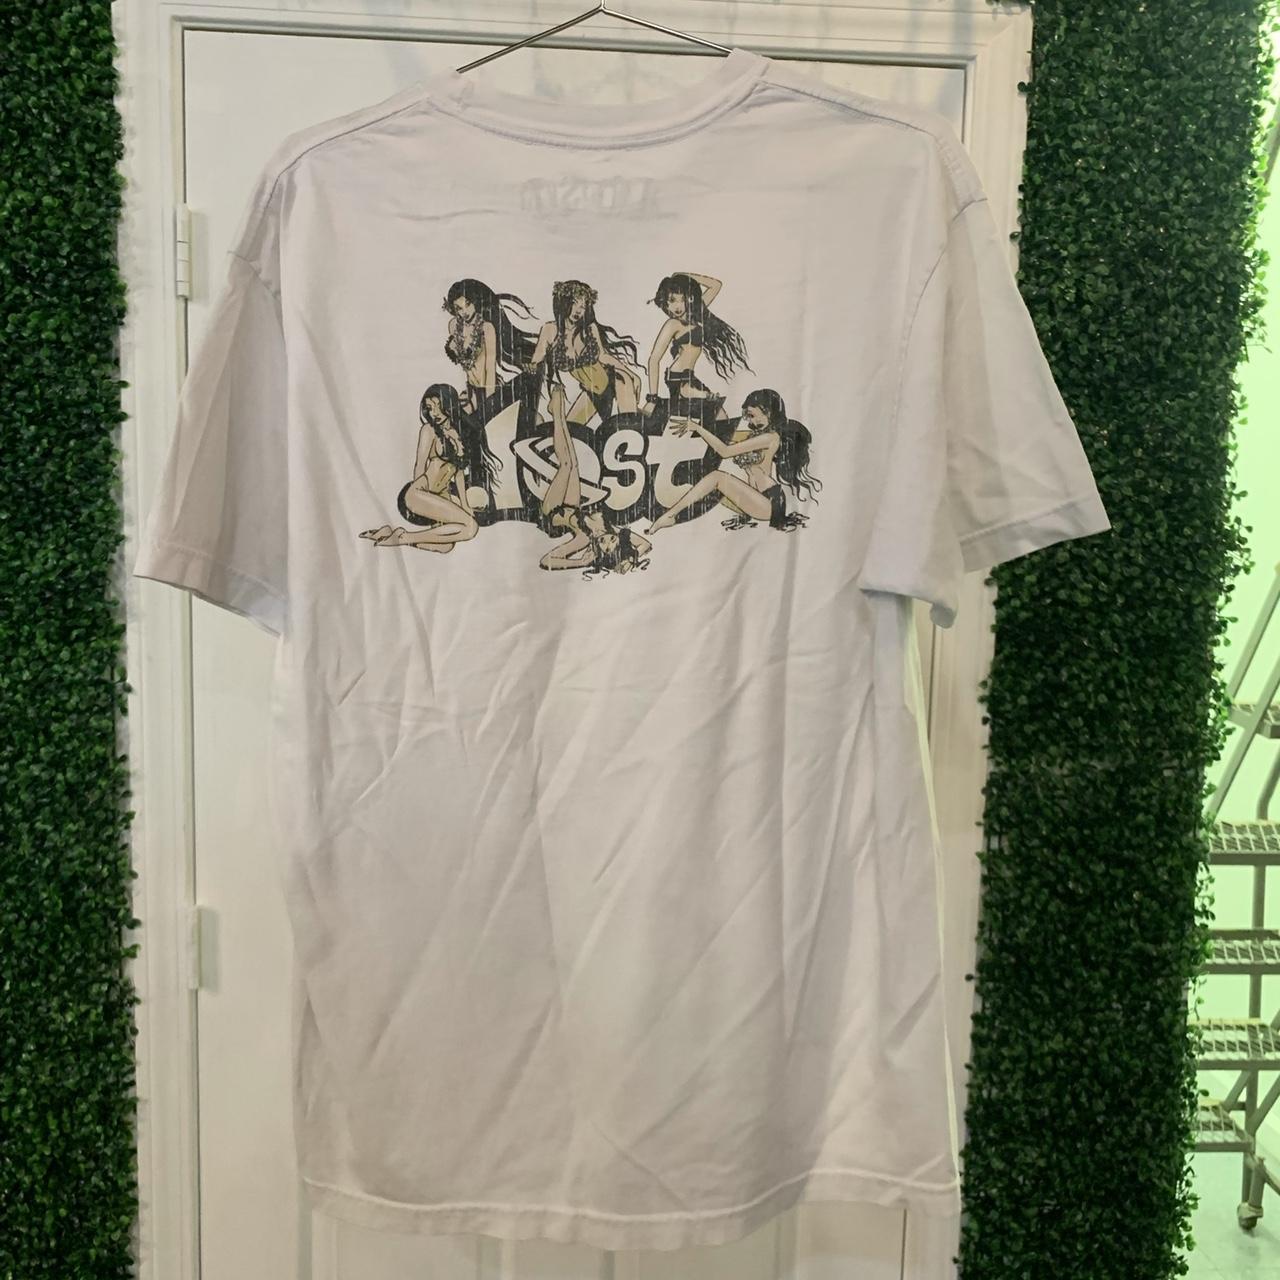 Lost Ink Men's White and Cream T-shirt